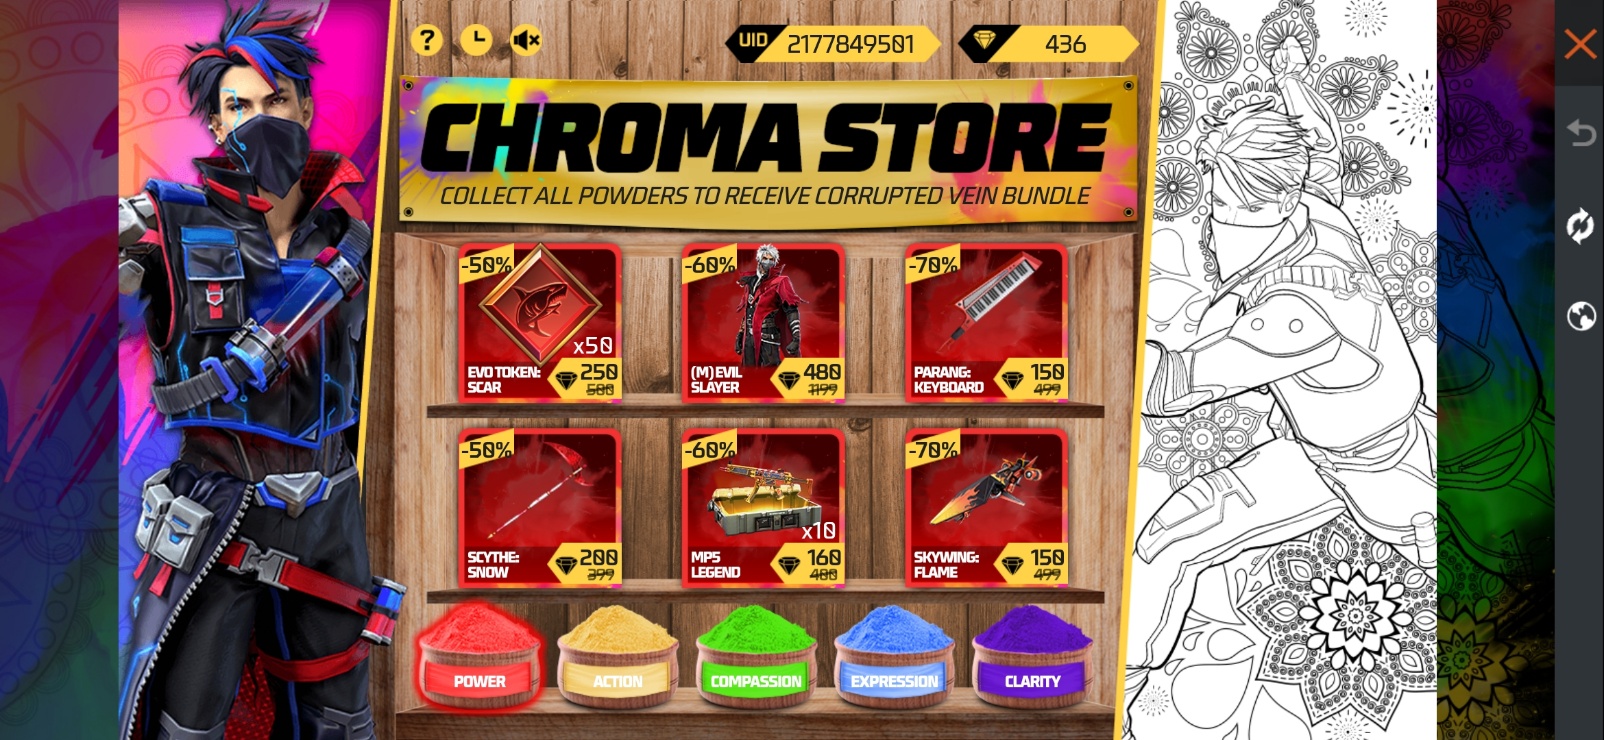 Chroma Store: How To Get The Corrupted Vein Bundle In Free Fire Max?